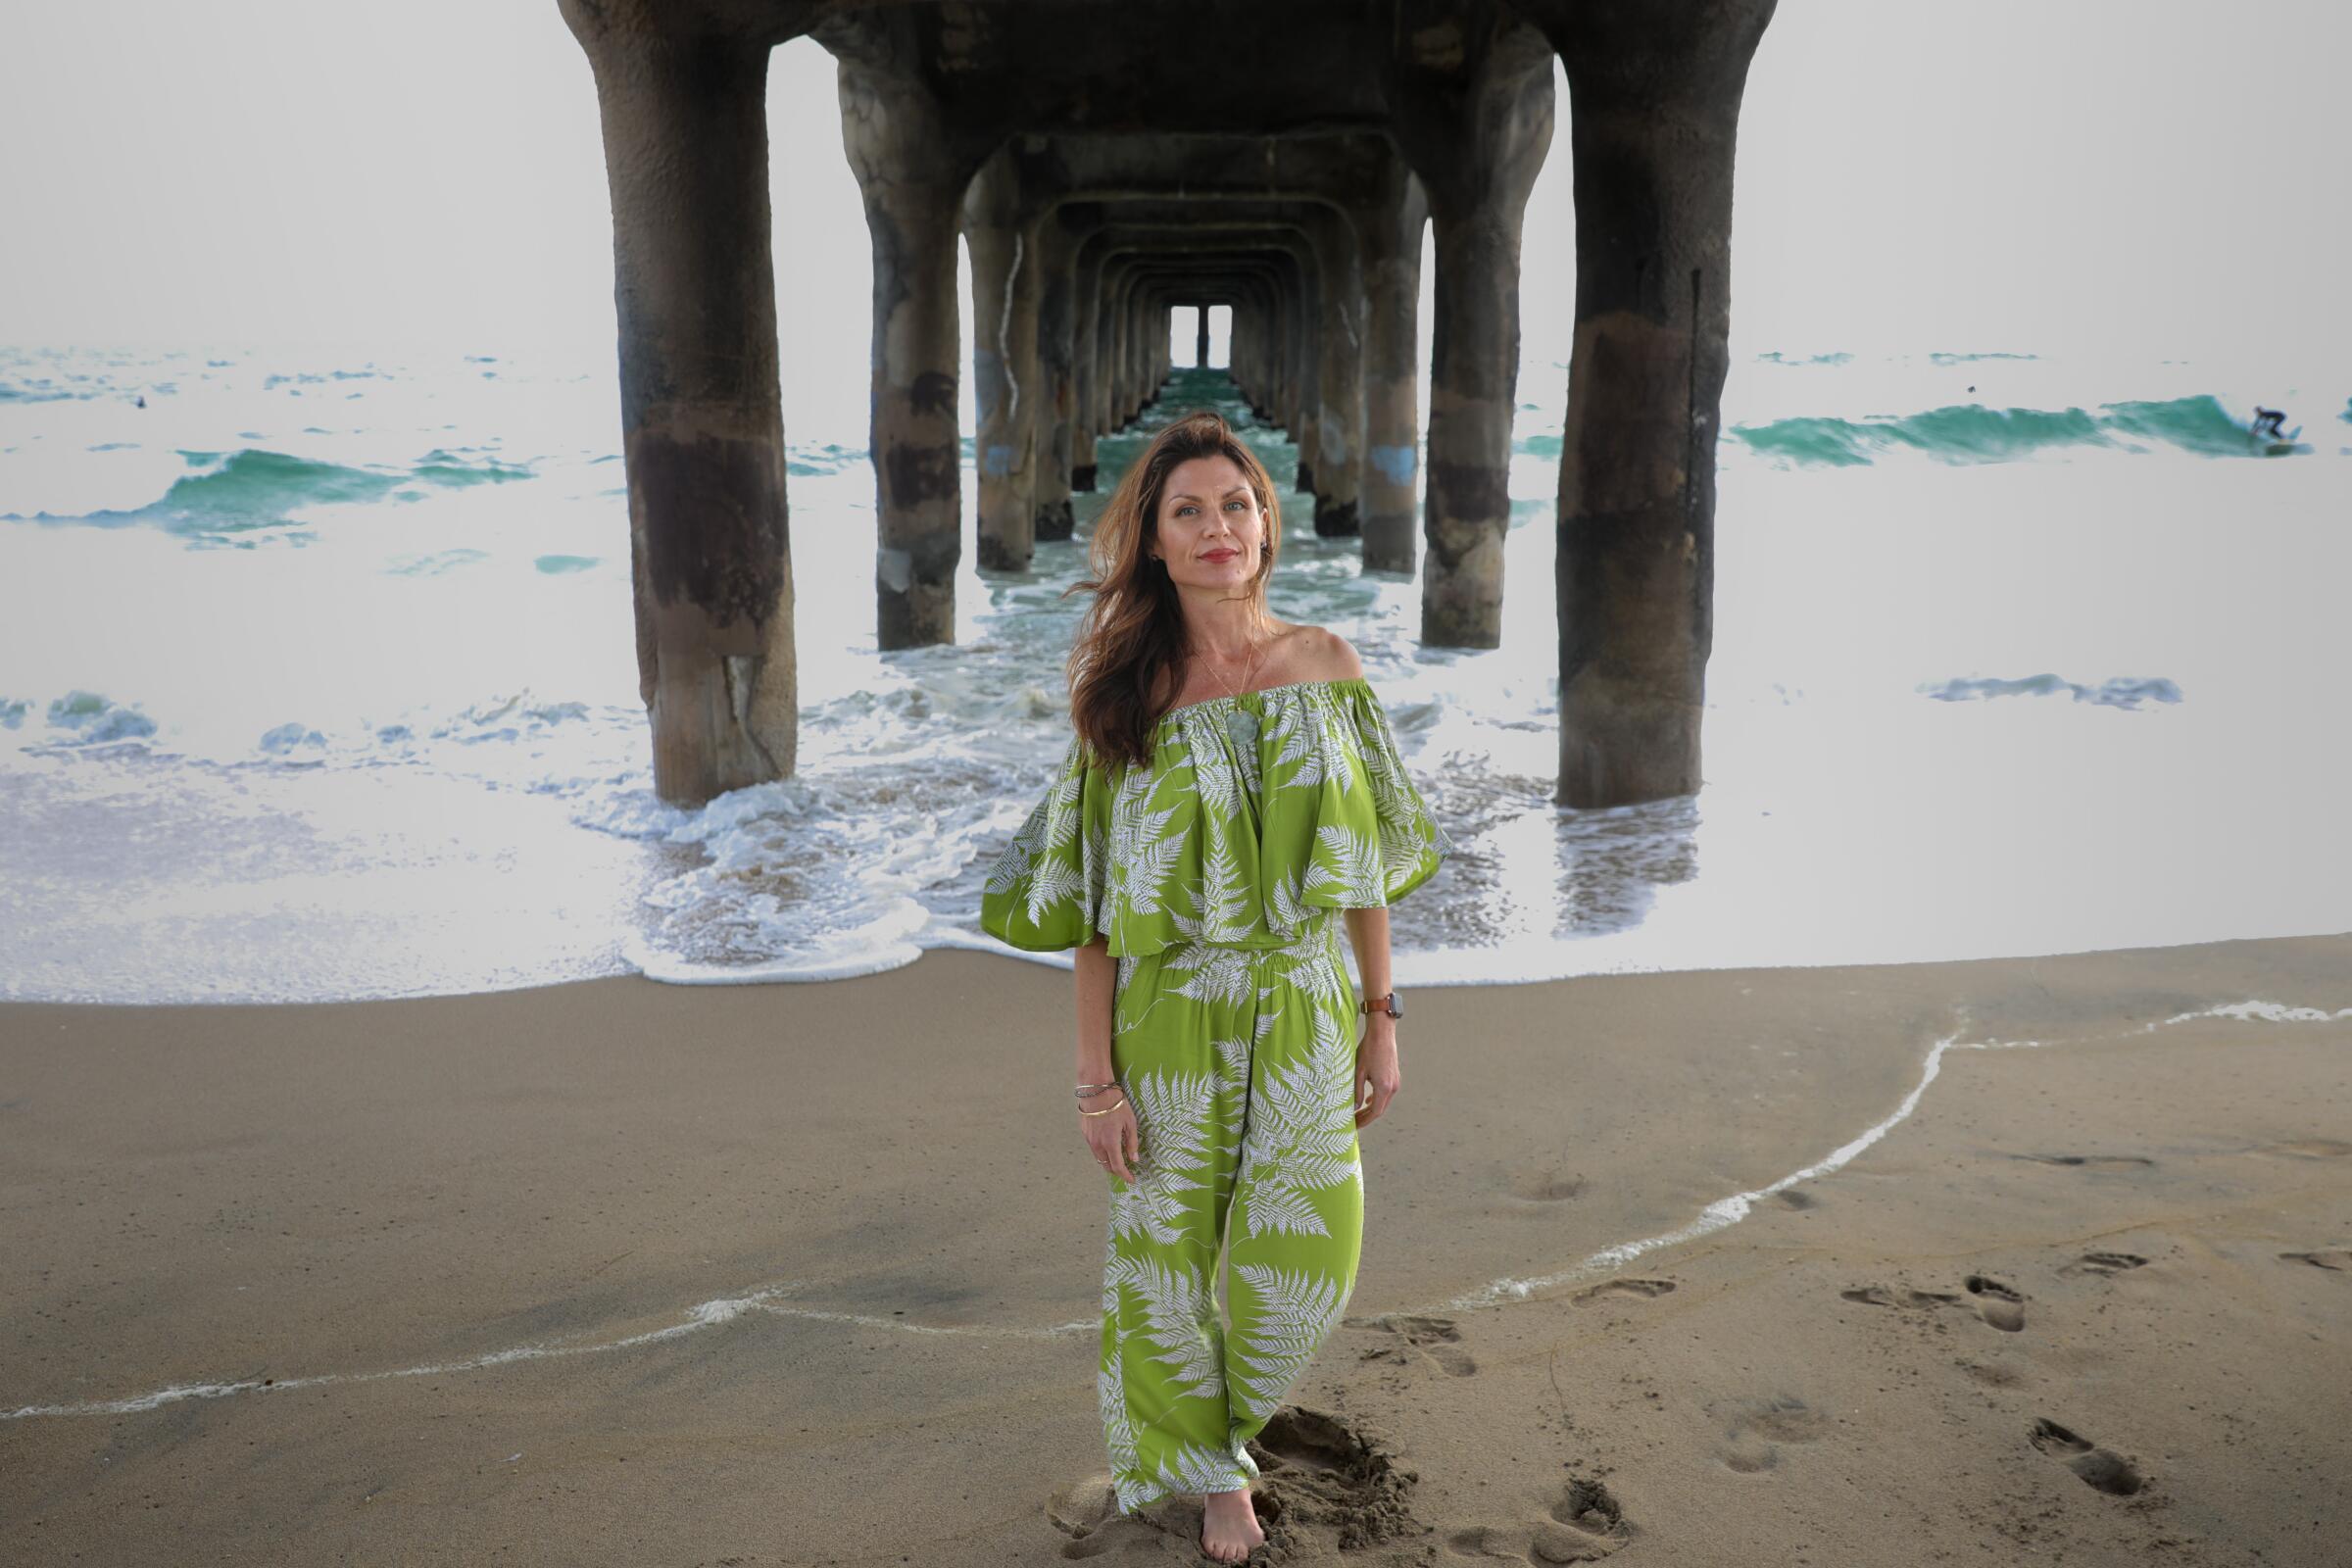 A woman in a green and white outfit stands under a pier with the ocean in the background.